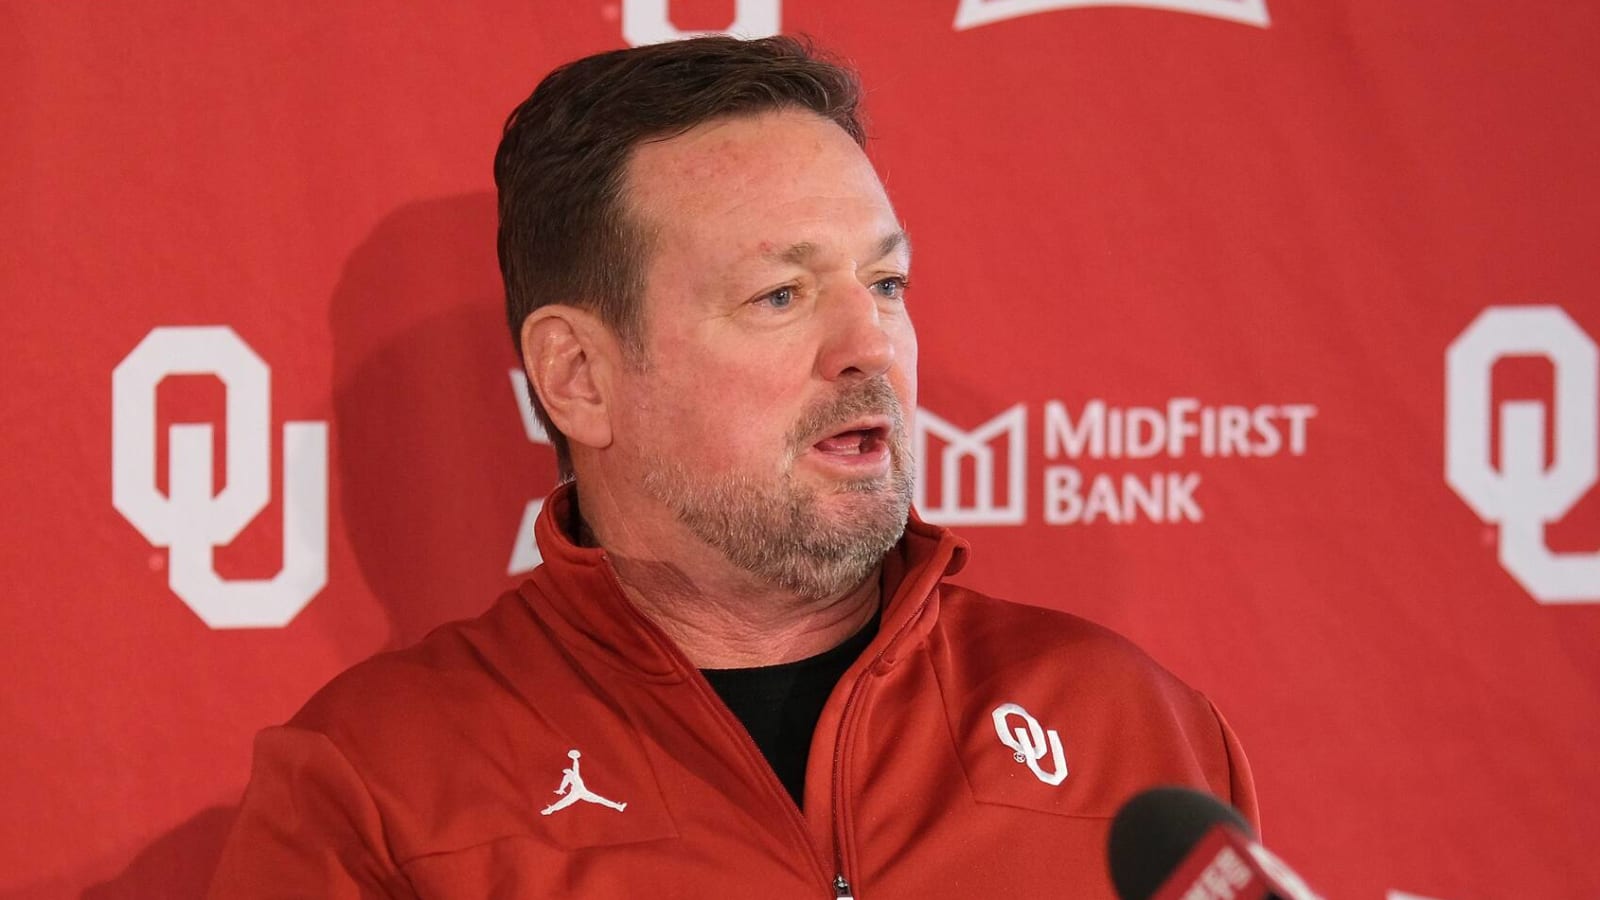 Bob Stoops says no question NIL makes coaching more challenging: ‘There’s no rules’